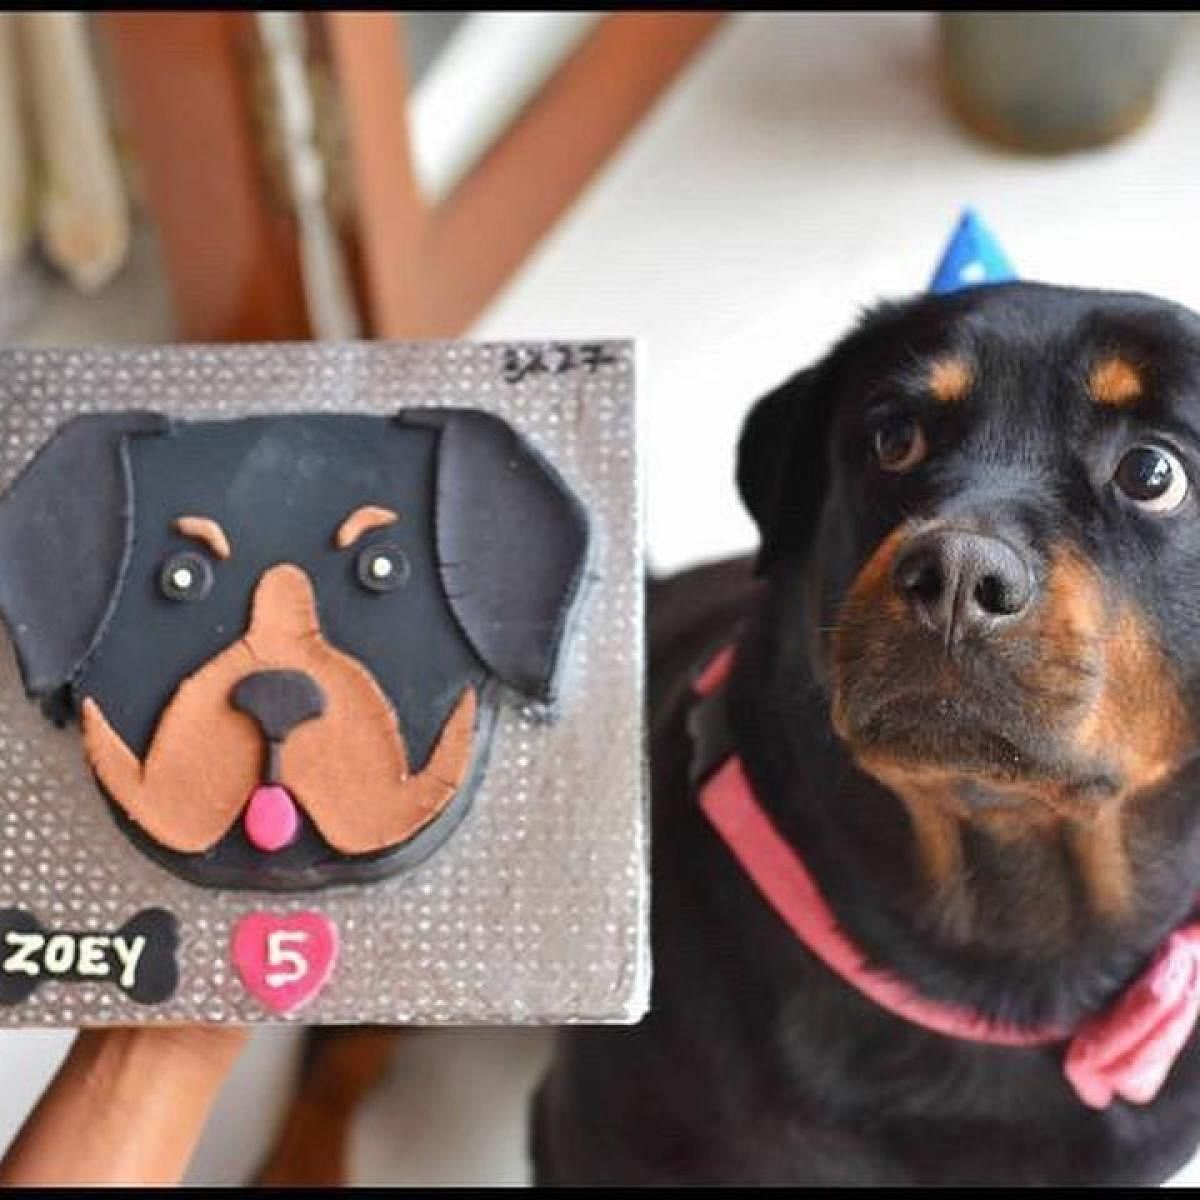 Greater awareness about pet allergies and dietary requirements, and availability of substitutes have made it easy for the bakeries to experiment with their menu. Photo credit: The Doggy Bakery